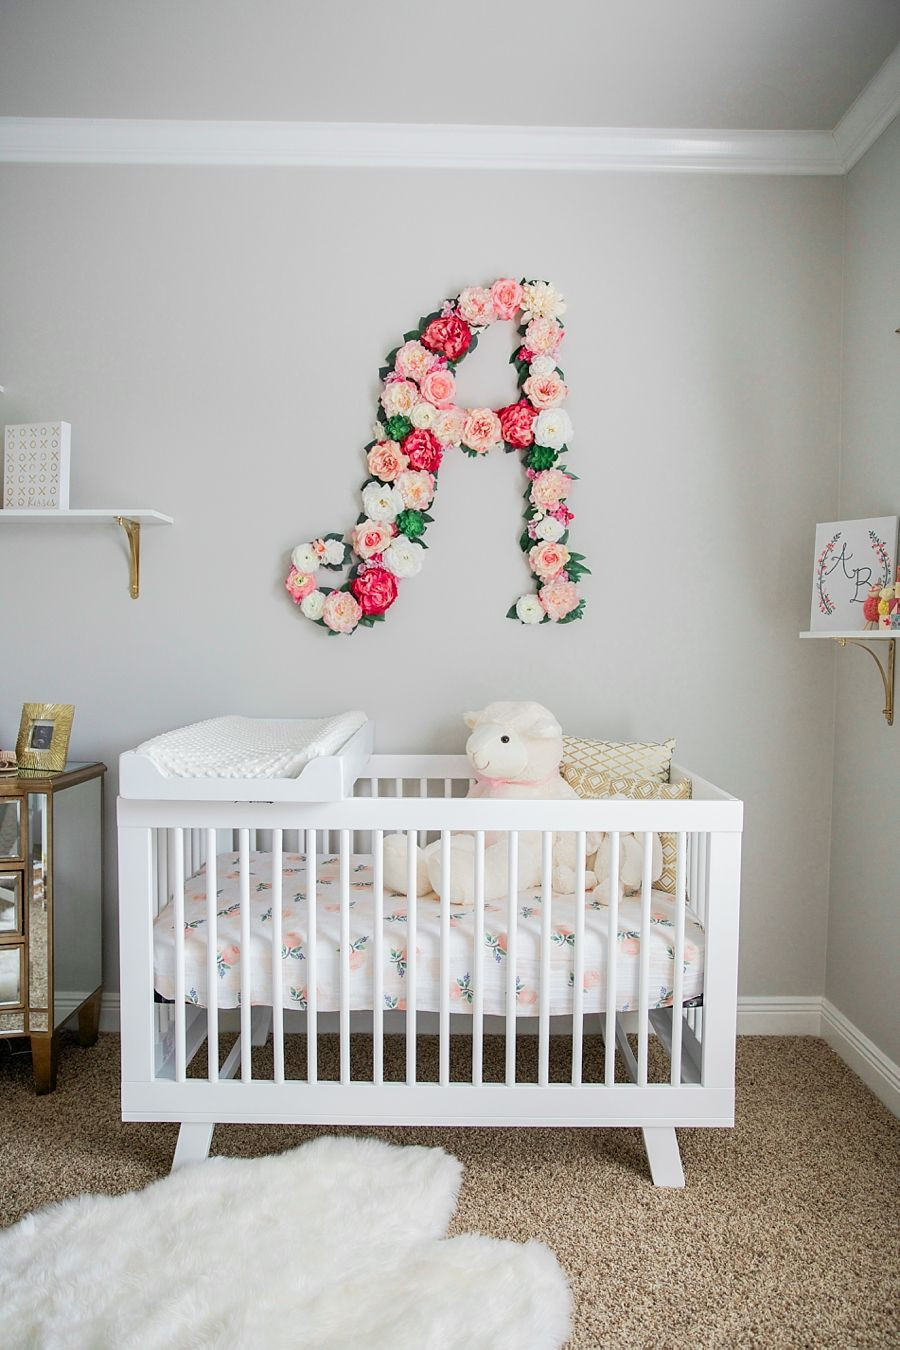 Baby Decor For Nursery
 Baby girl nursery with floral wall